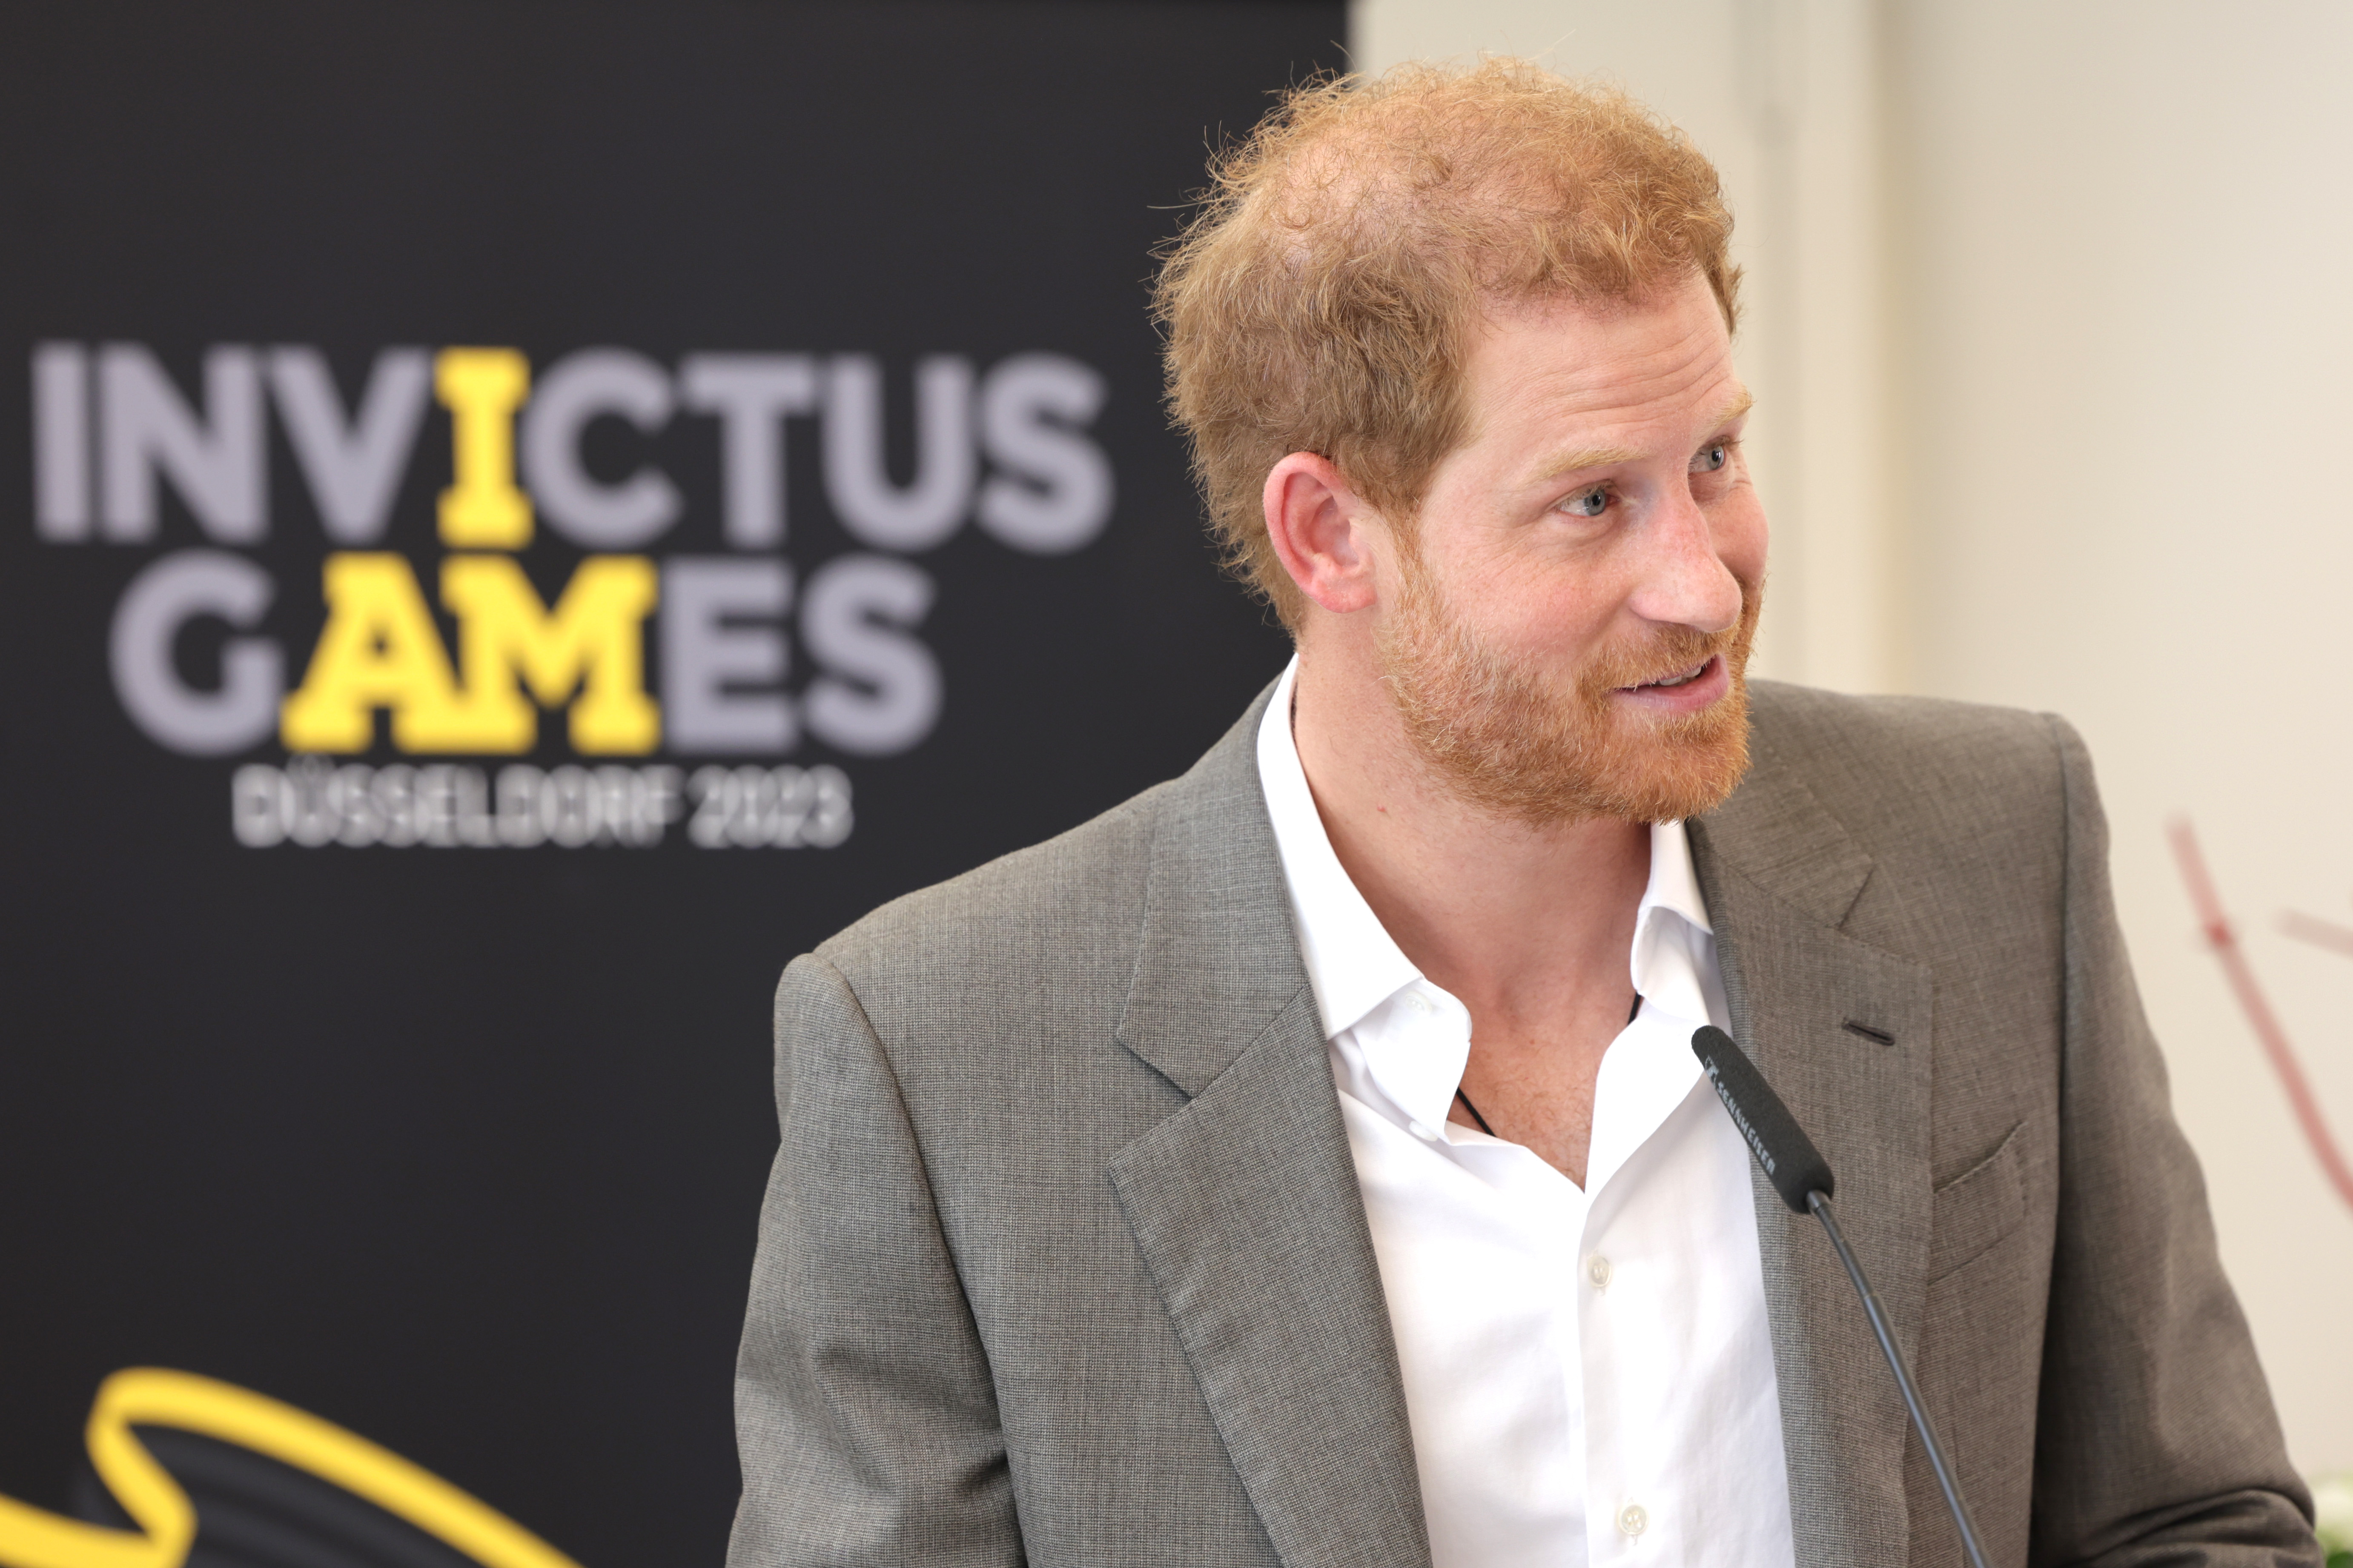 Prince Harry, Duke of Sussex speaking at the Invictus Games Dusseldorf 2023 One Year To Go event on September 6, 2022, in Dusseldorf, Germany. | Source: Getty Images